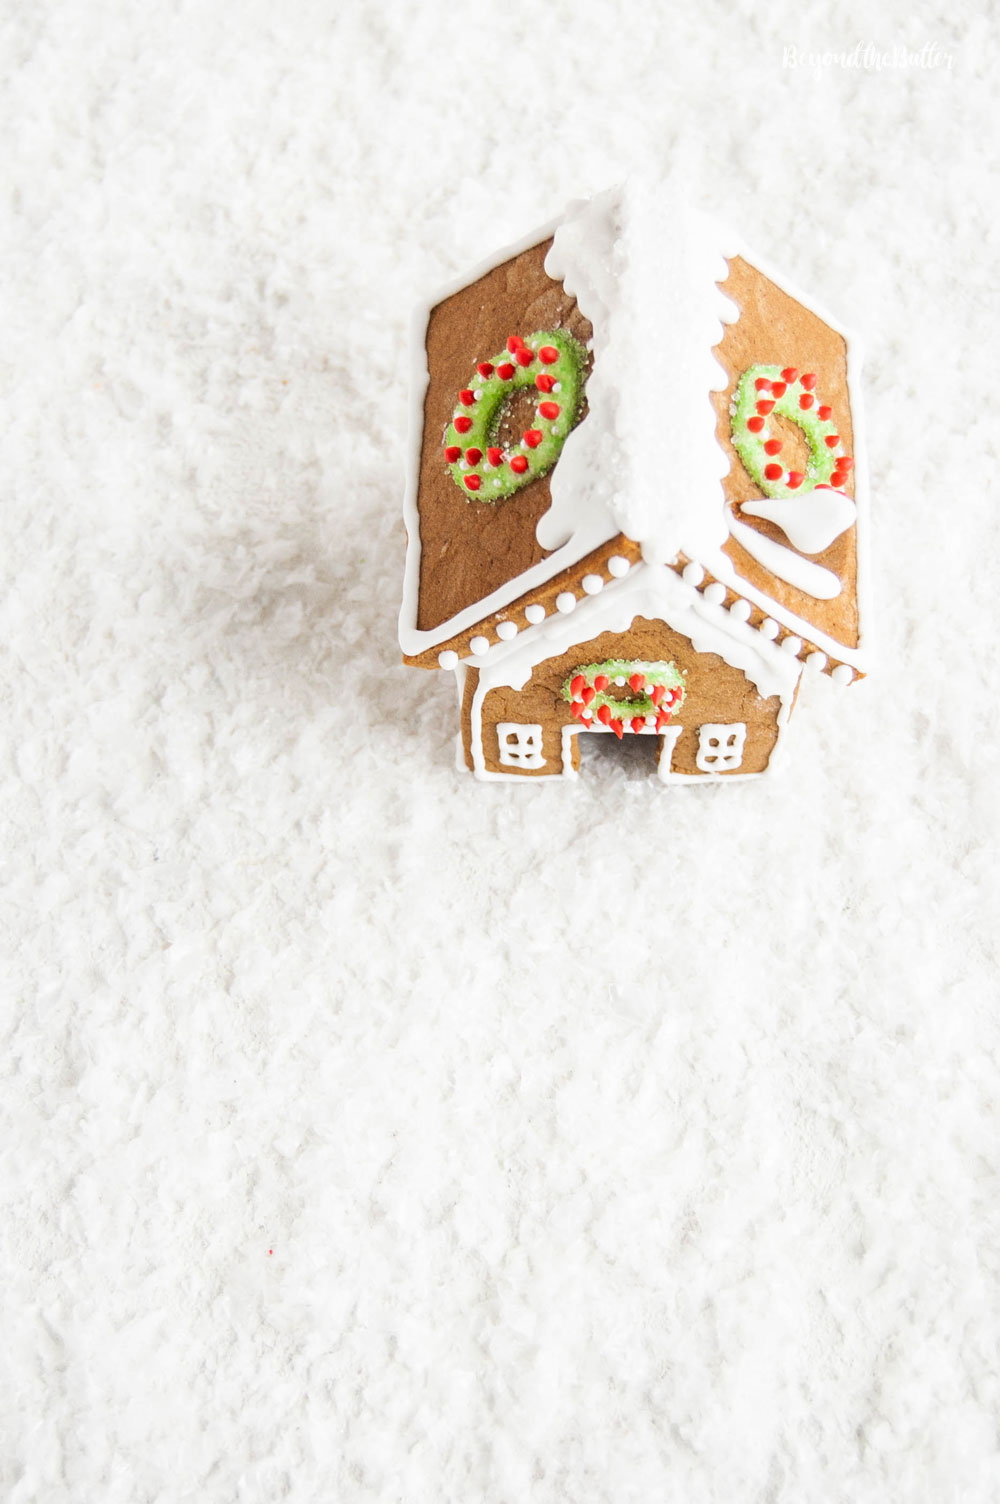 Homemade Gingerbread Houses - Overlooking the roof of one gingerbread house with wreaths on each side | All Images © Beyond the Butter, LLC